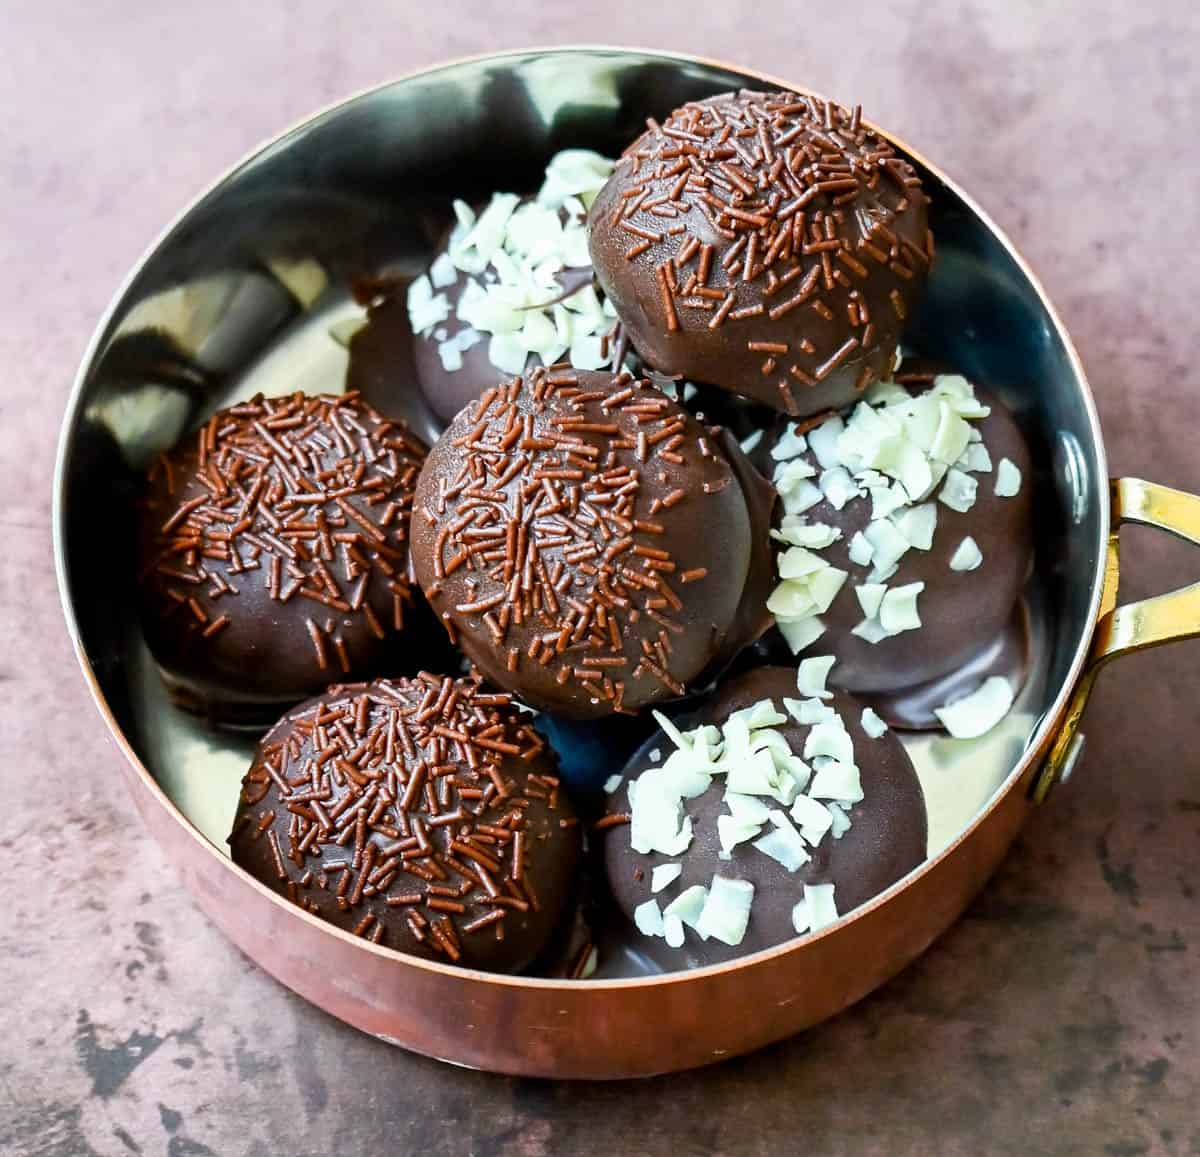 Rich and creamy Oreo cake pops with a smooth chocolate coating. An easy homemade Oreo chocolate truffle with only 4 ingredients! The BEST Oreo balls recipe.